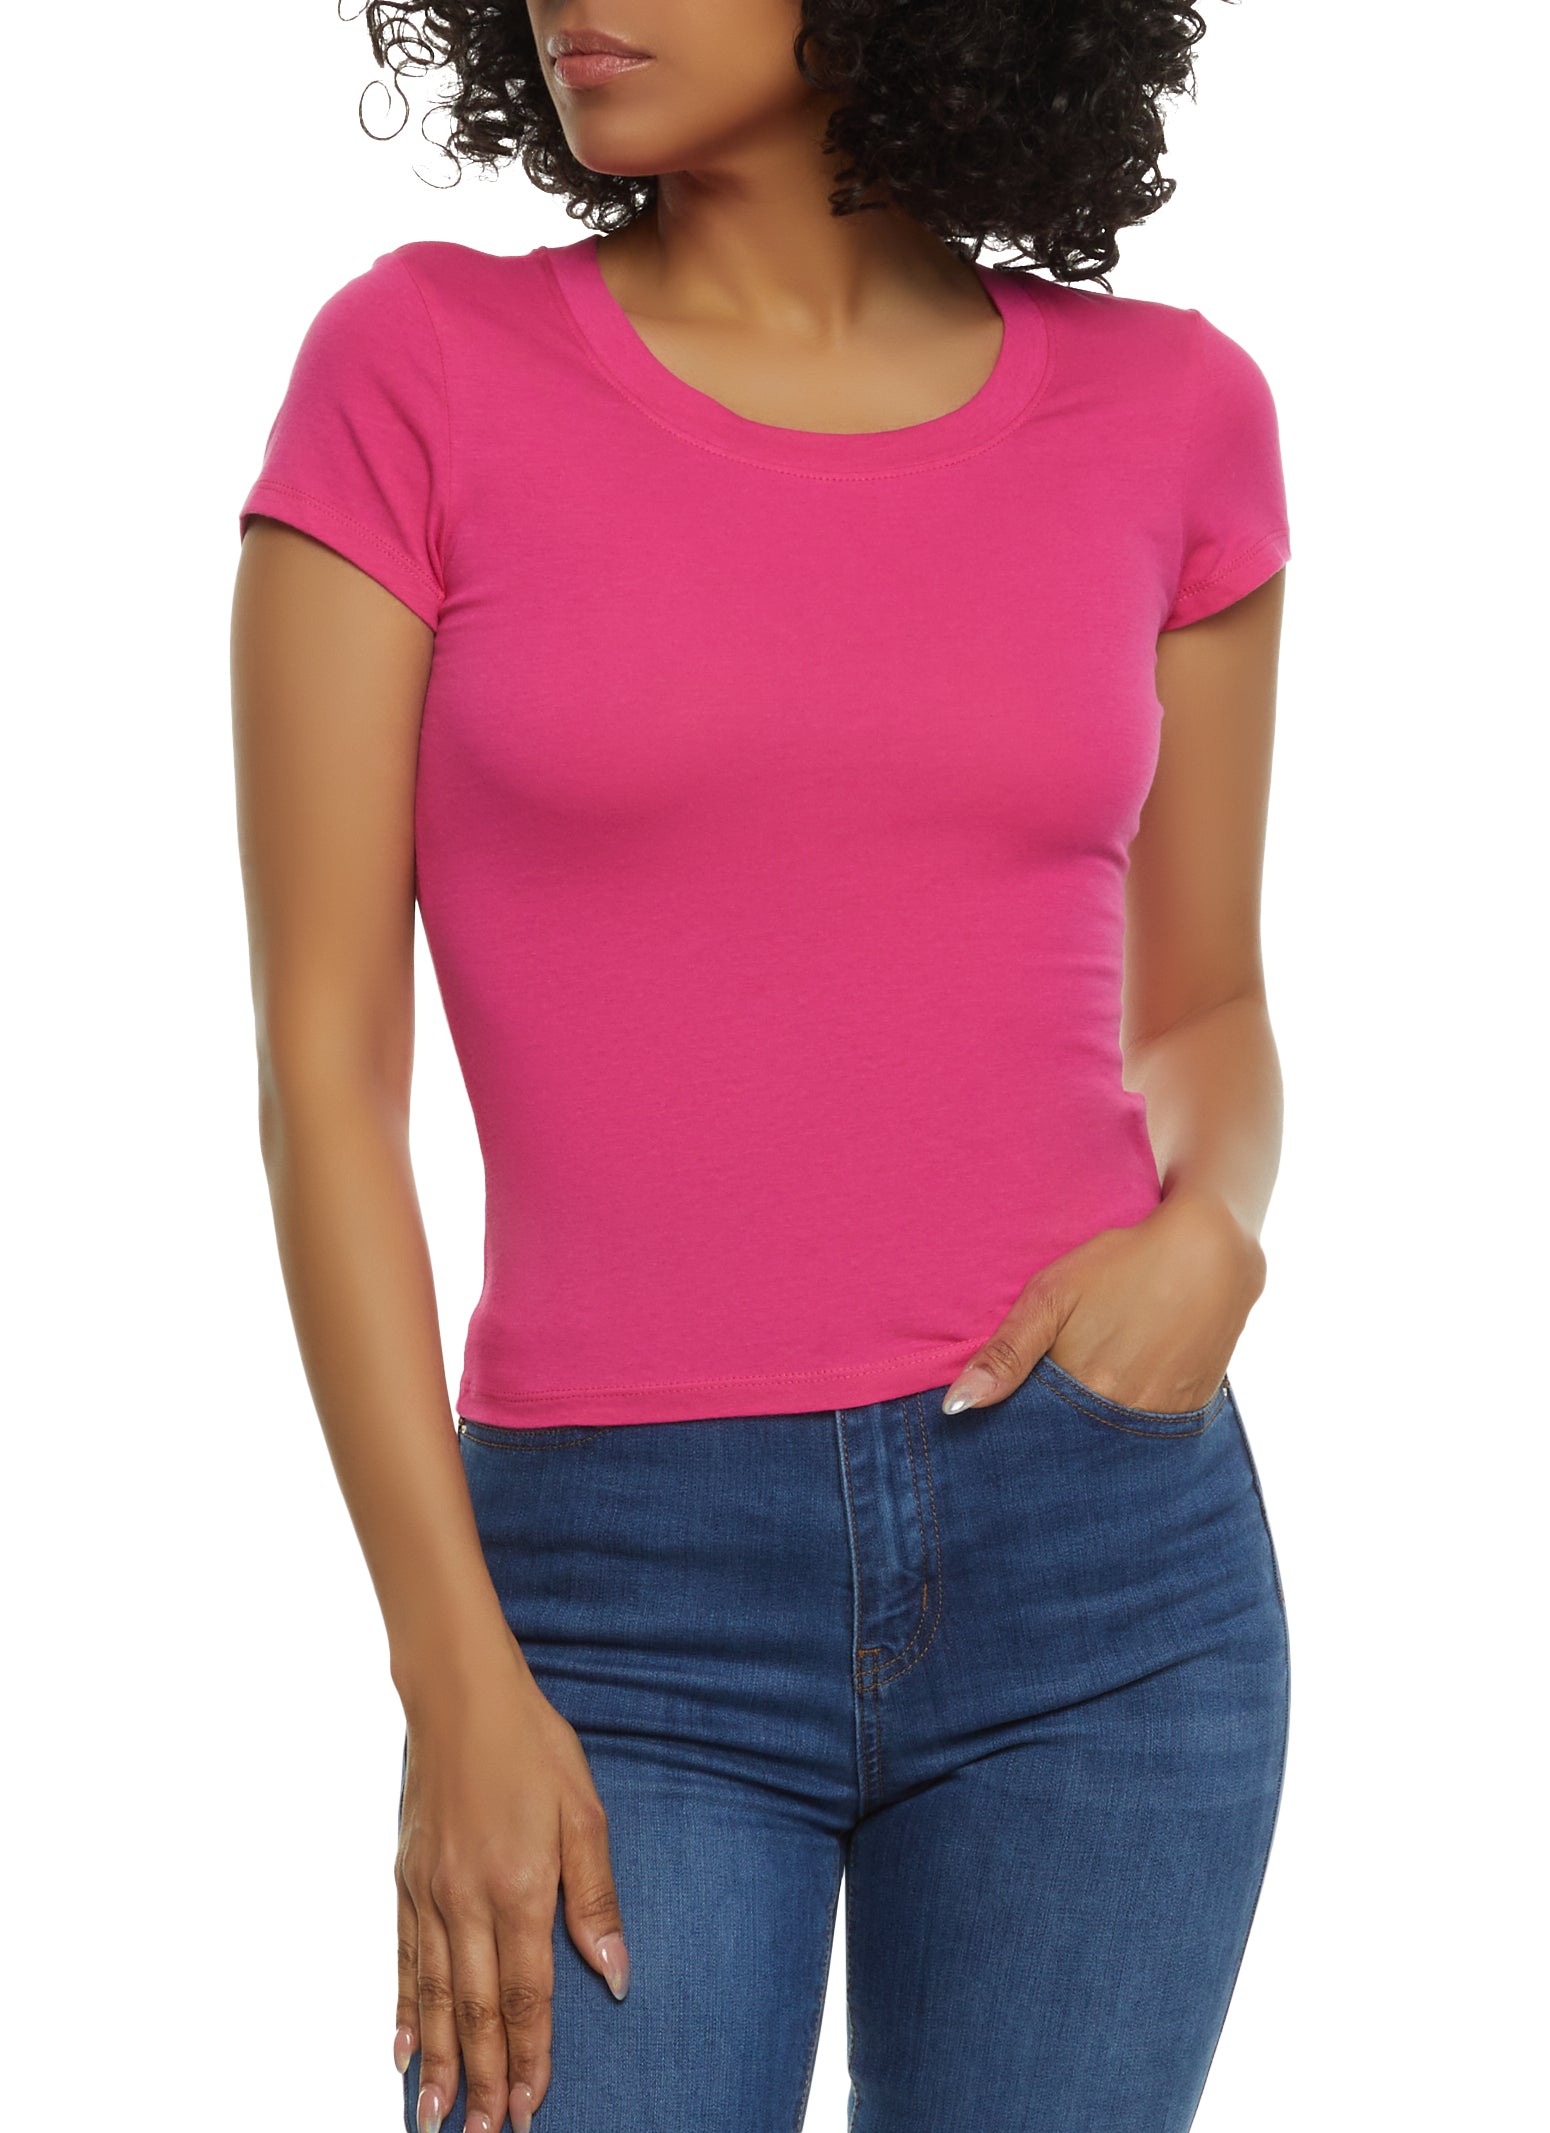 Womens Short Sleeve Tops, Everyday Low Prices